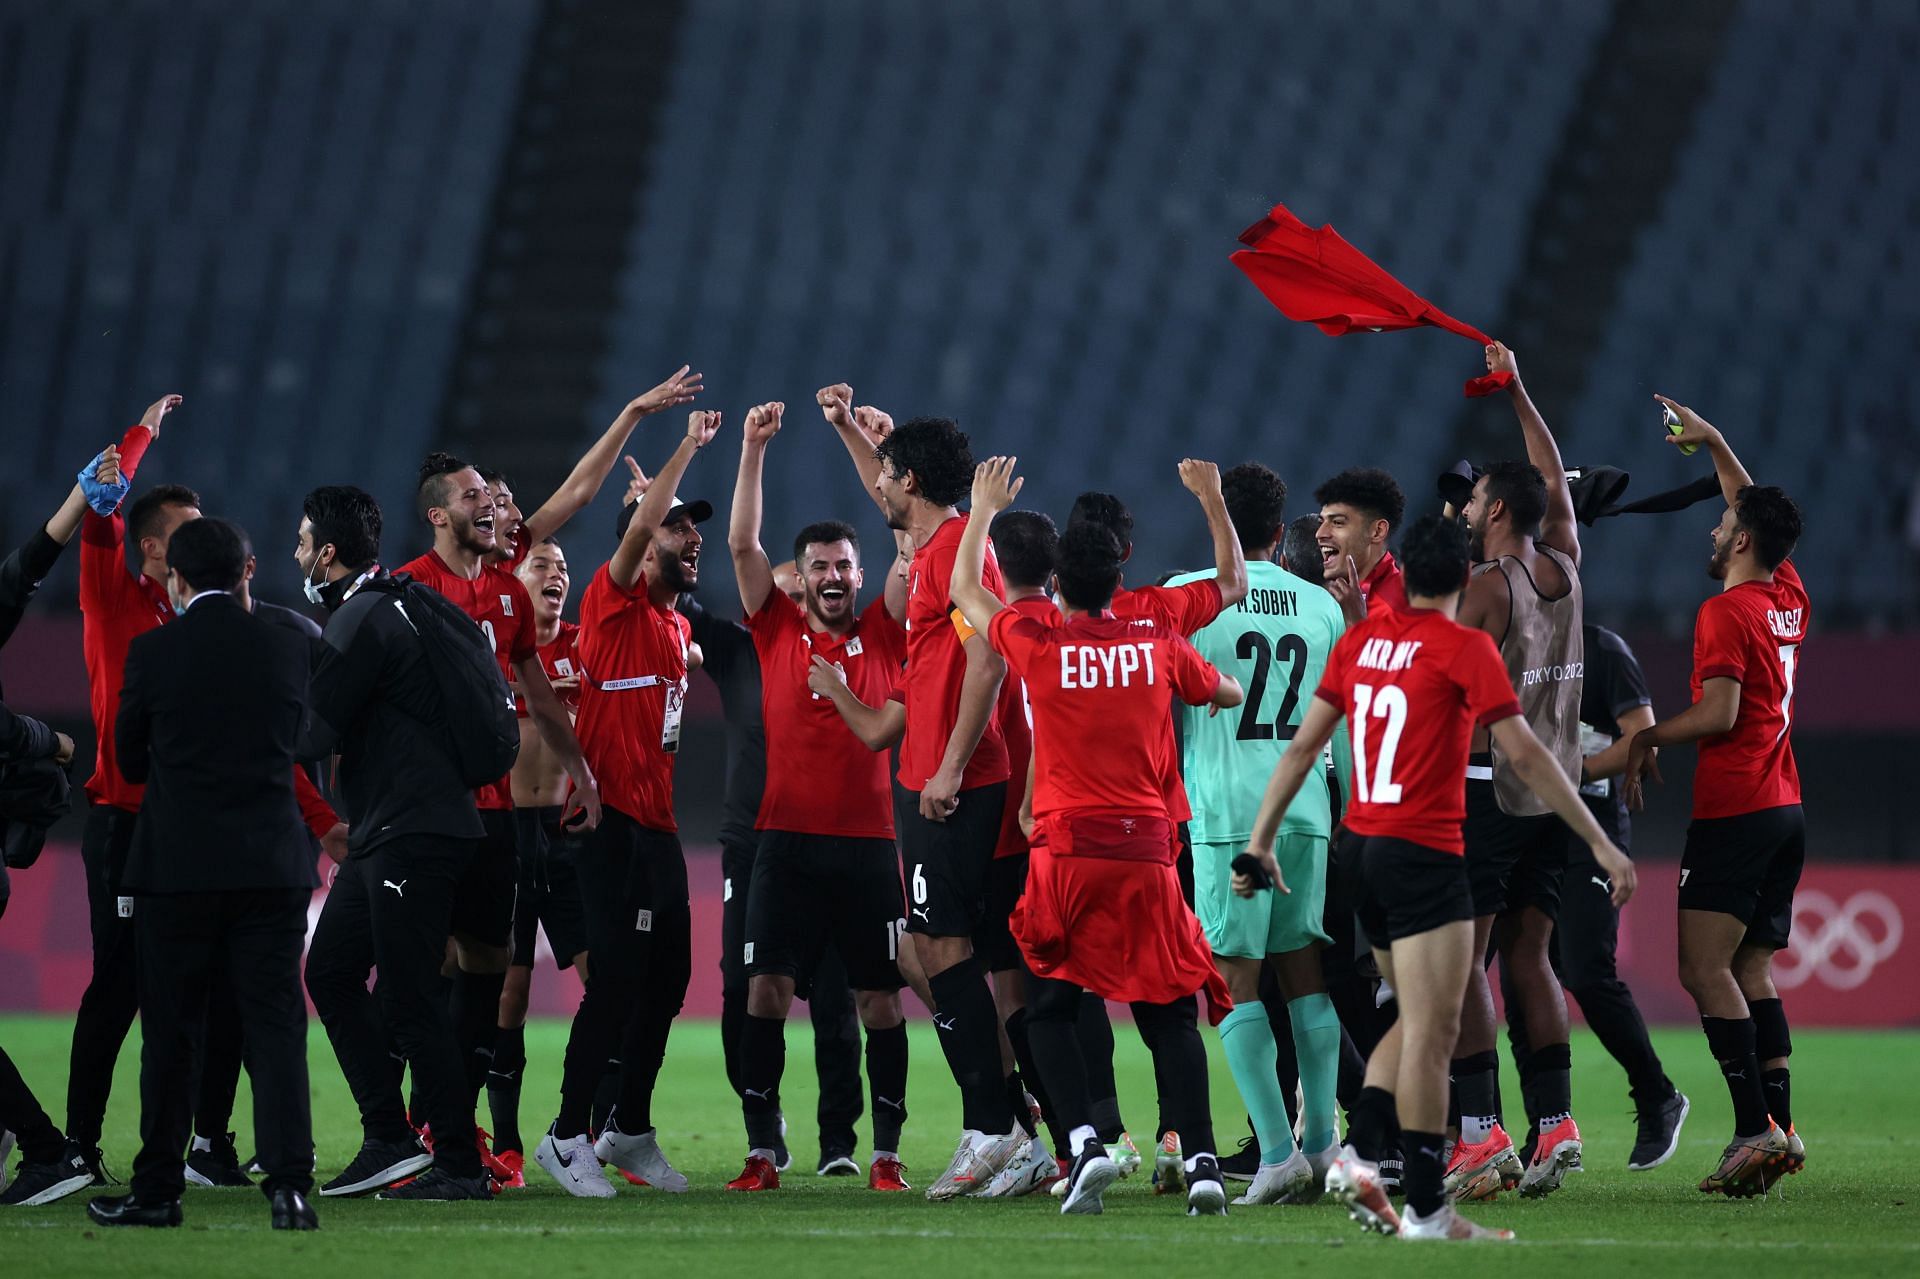 Egypt face Sudan in their final group stage fixture at 2021 AFCON